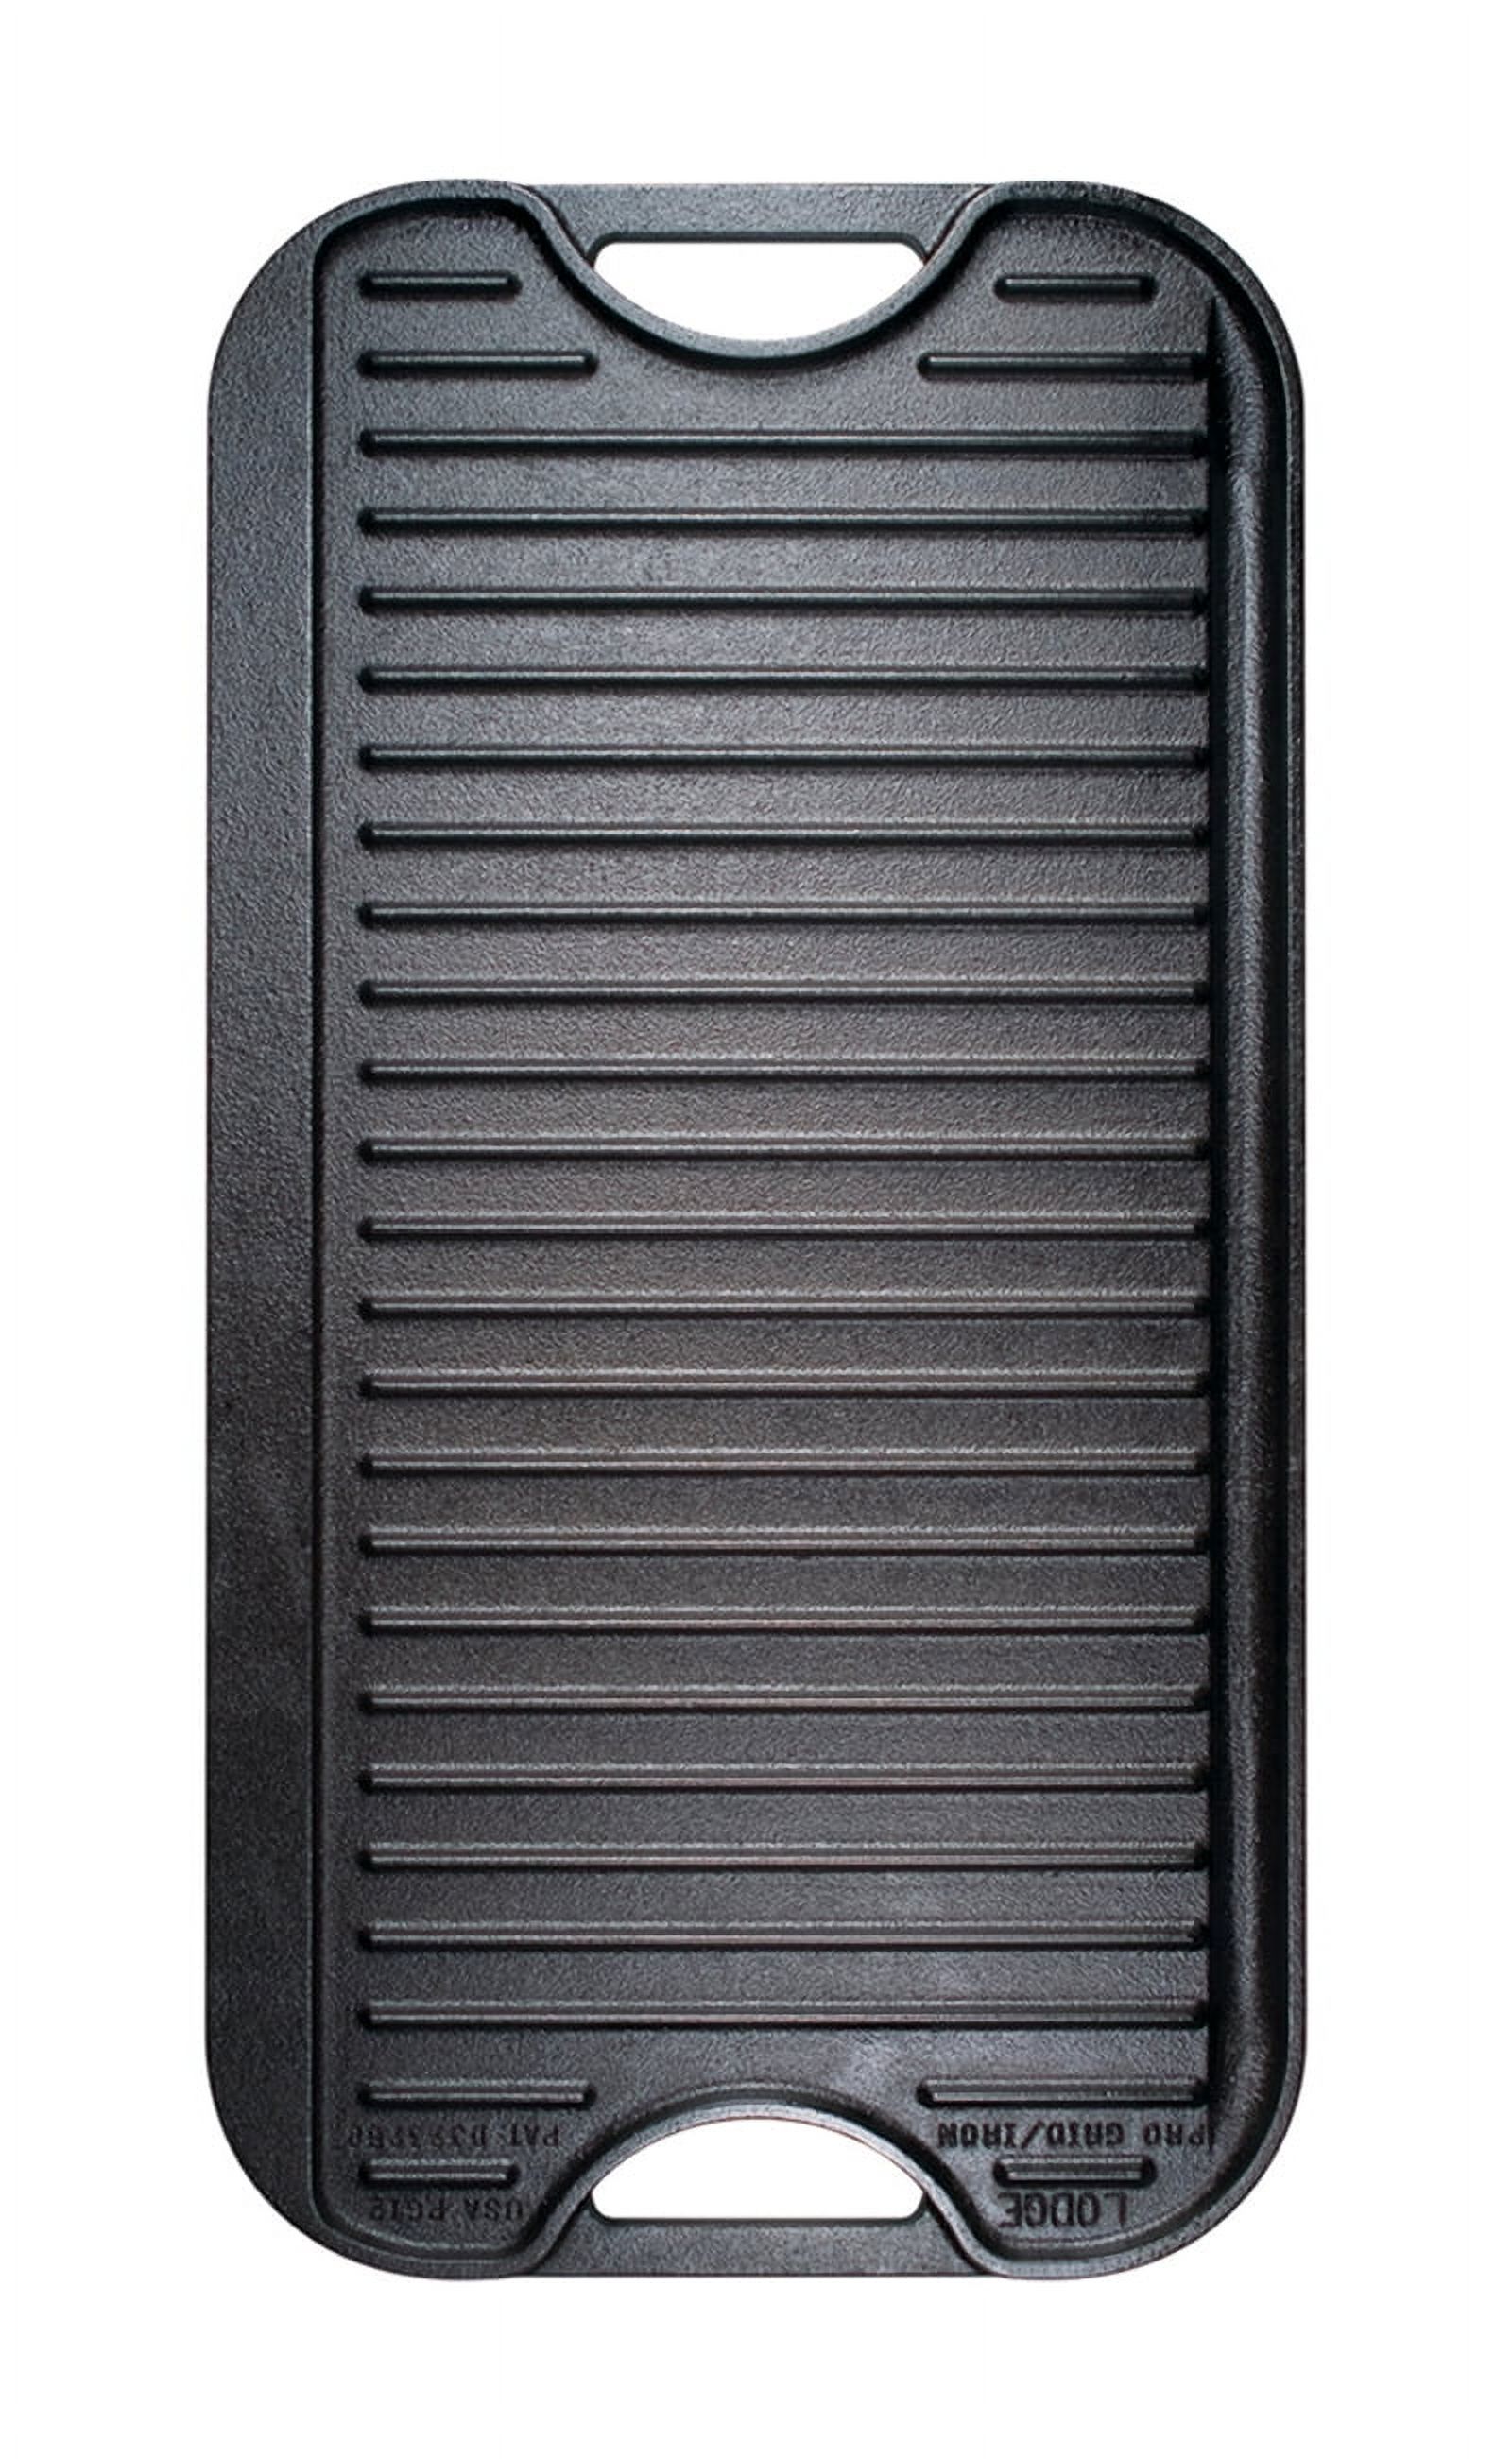 Lodge Cast Iron Seasoned Pro Grid Reversible Grill/Griddle - image 5 of 6